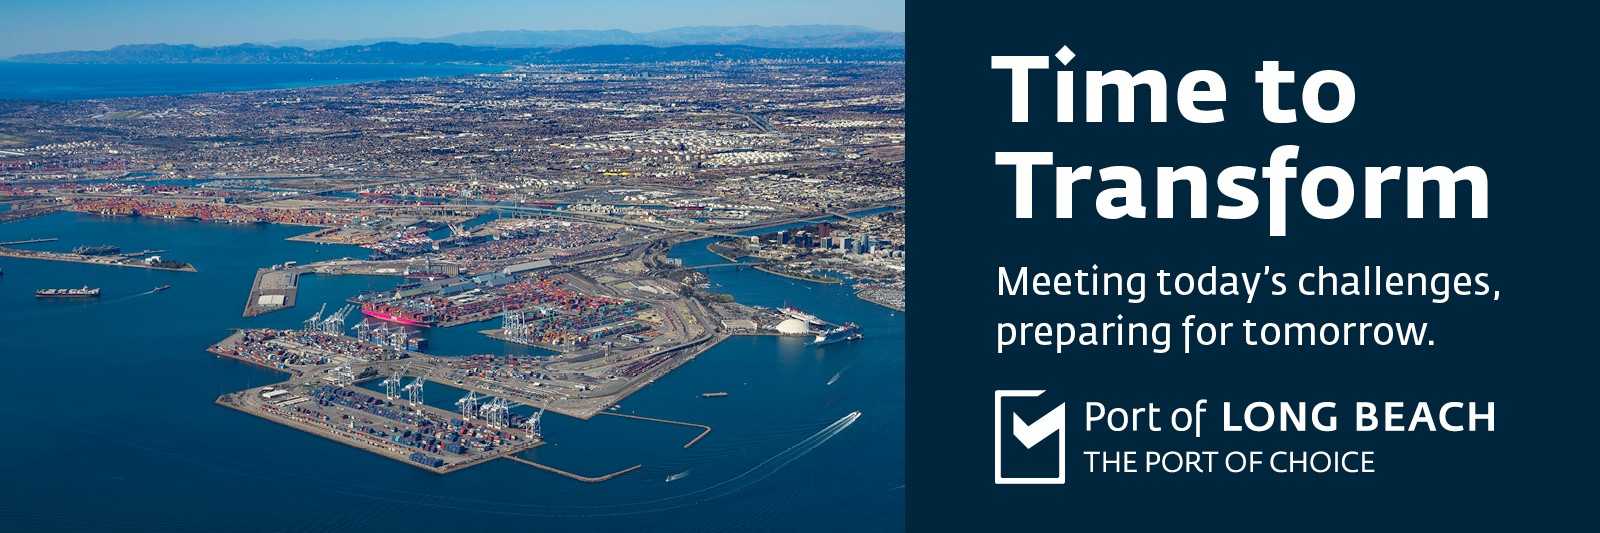 Port Of Long Beach Time To Transform